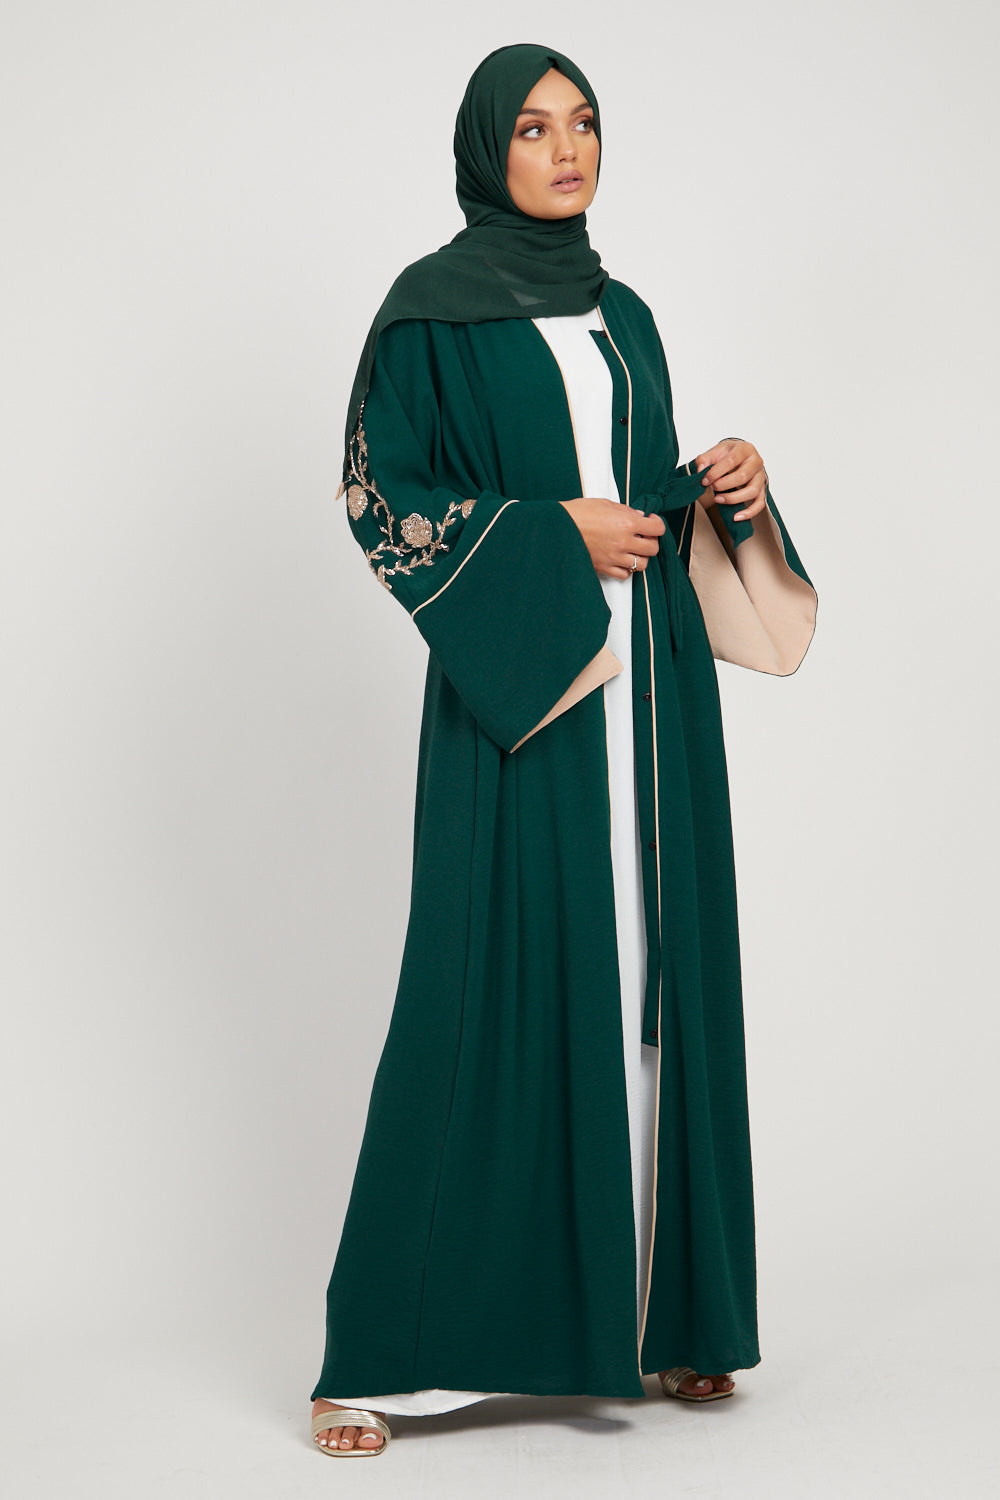 Floral Embellished Contrast Cuff Open Abaya - Emerald Green